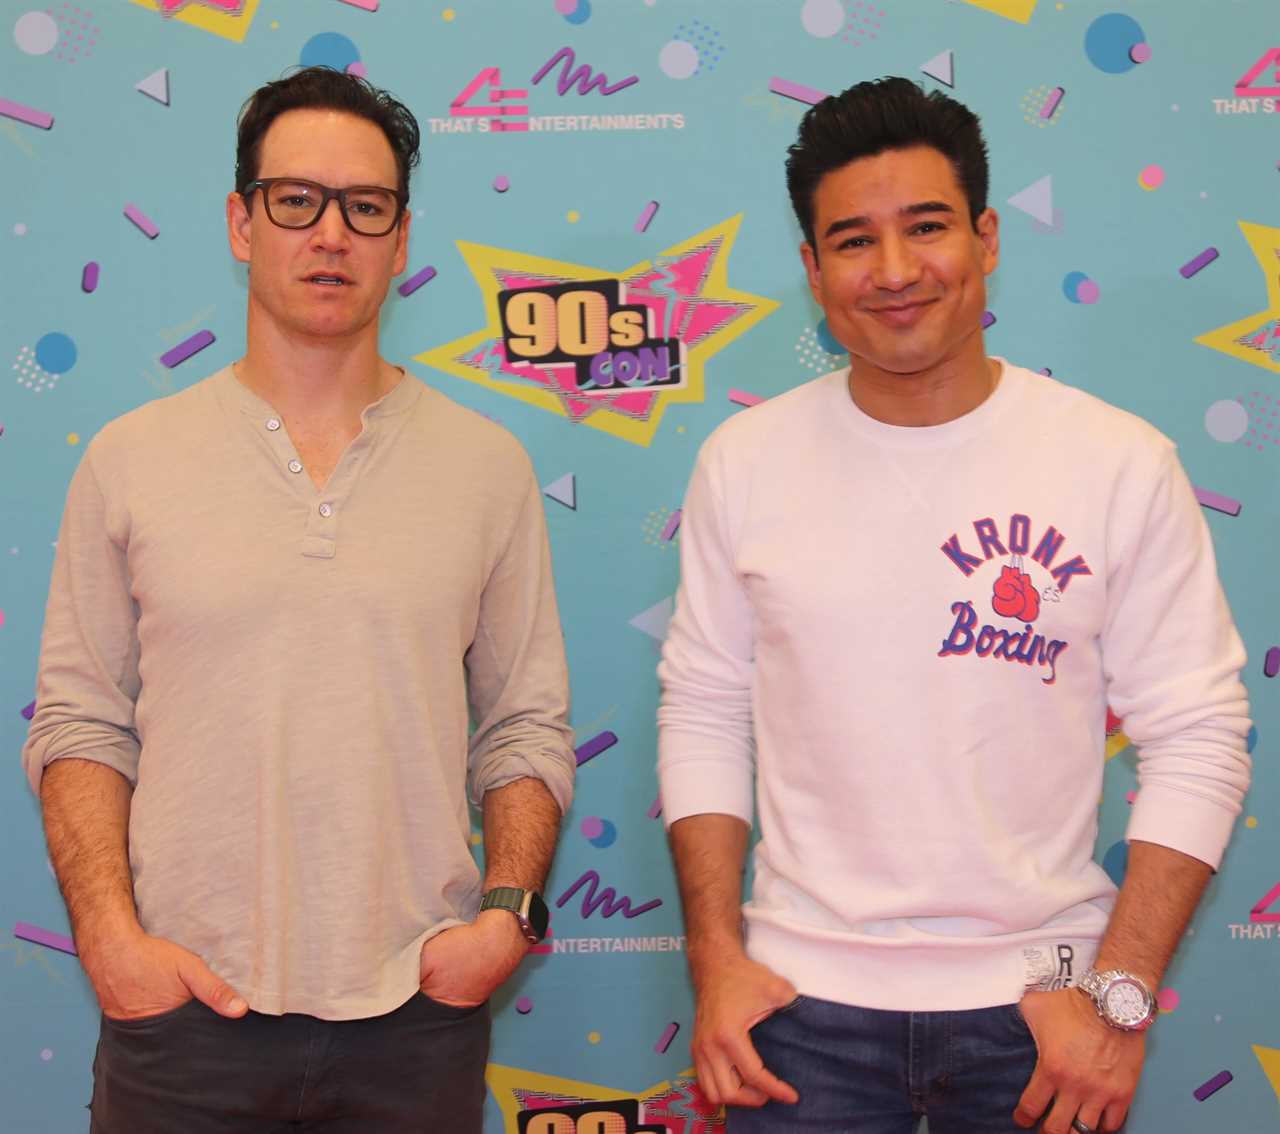 Saved By The Bell’s Zack Morris and AC Slater look very different aged nearly 50 as they reunite after three decades